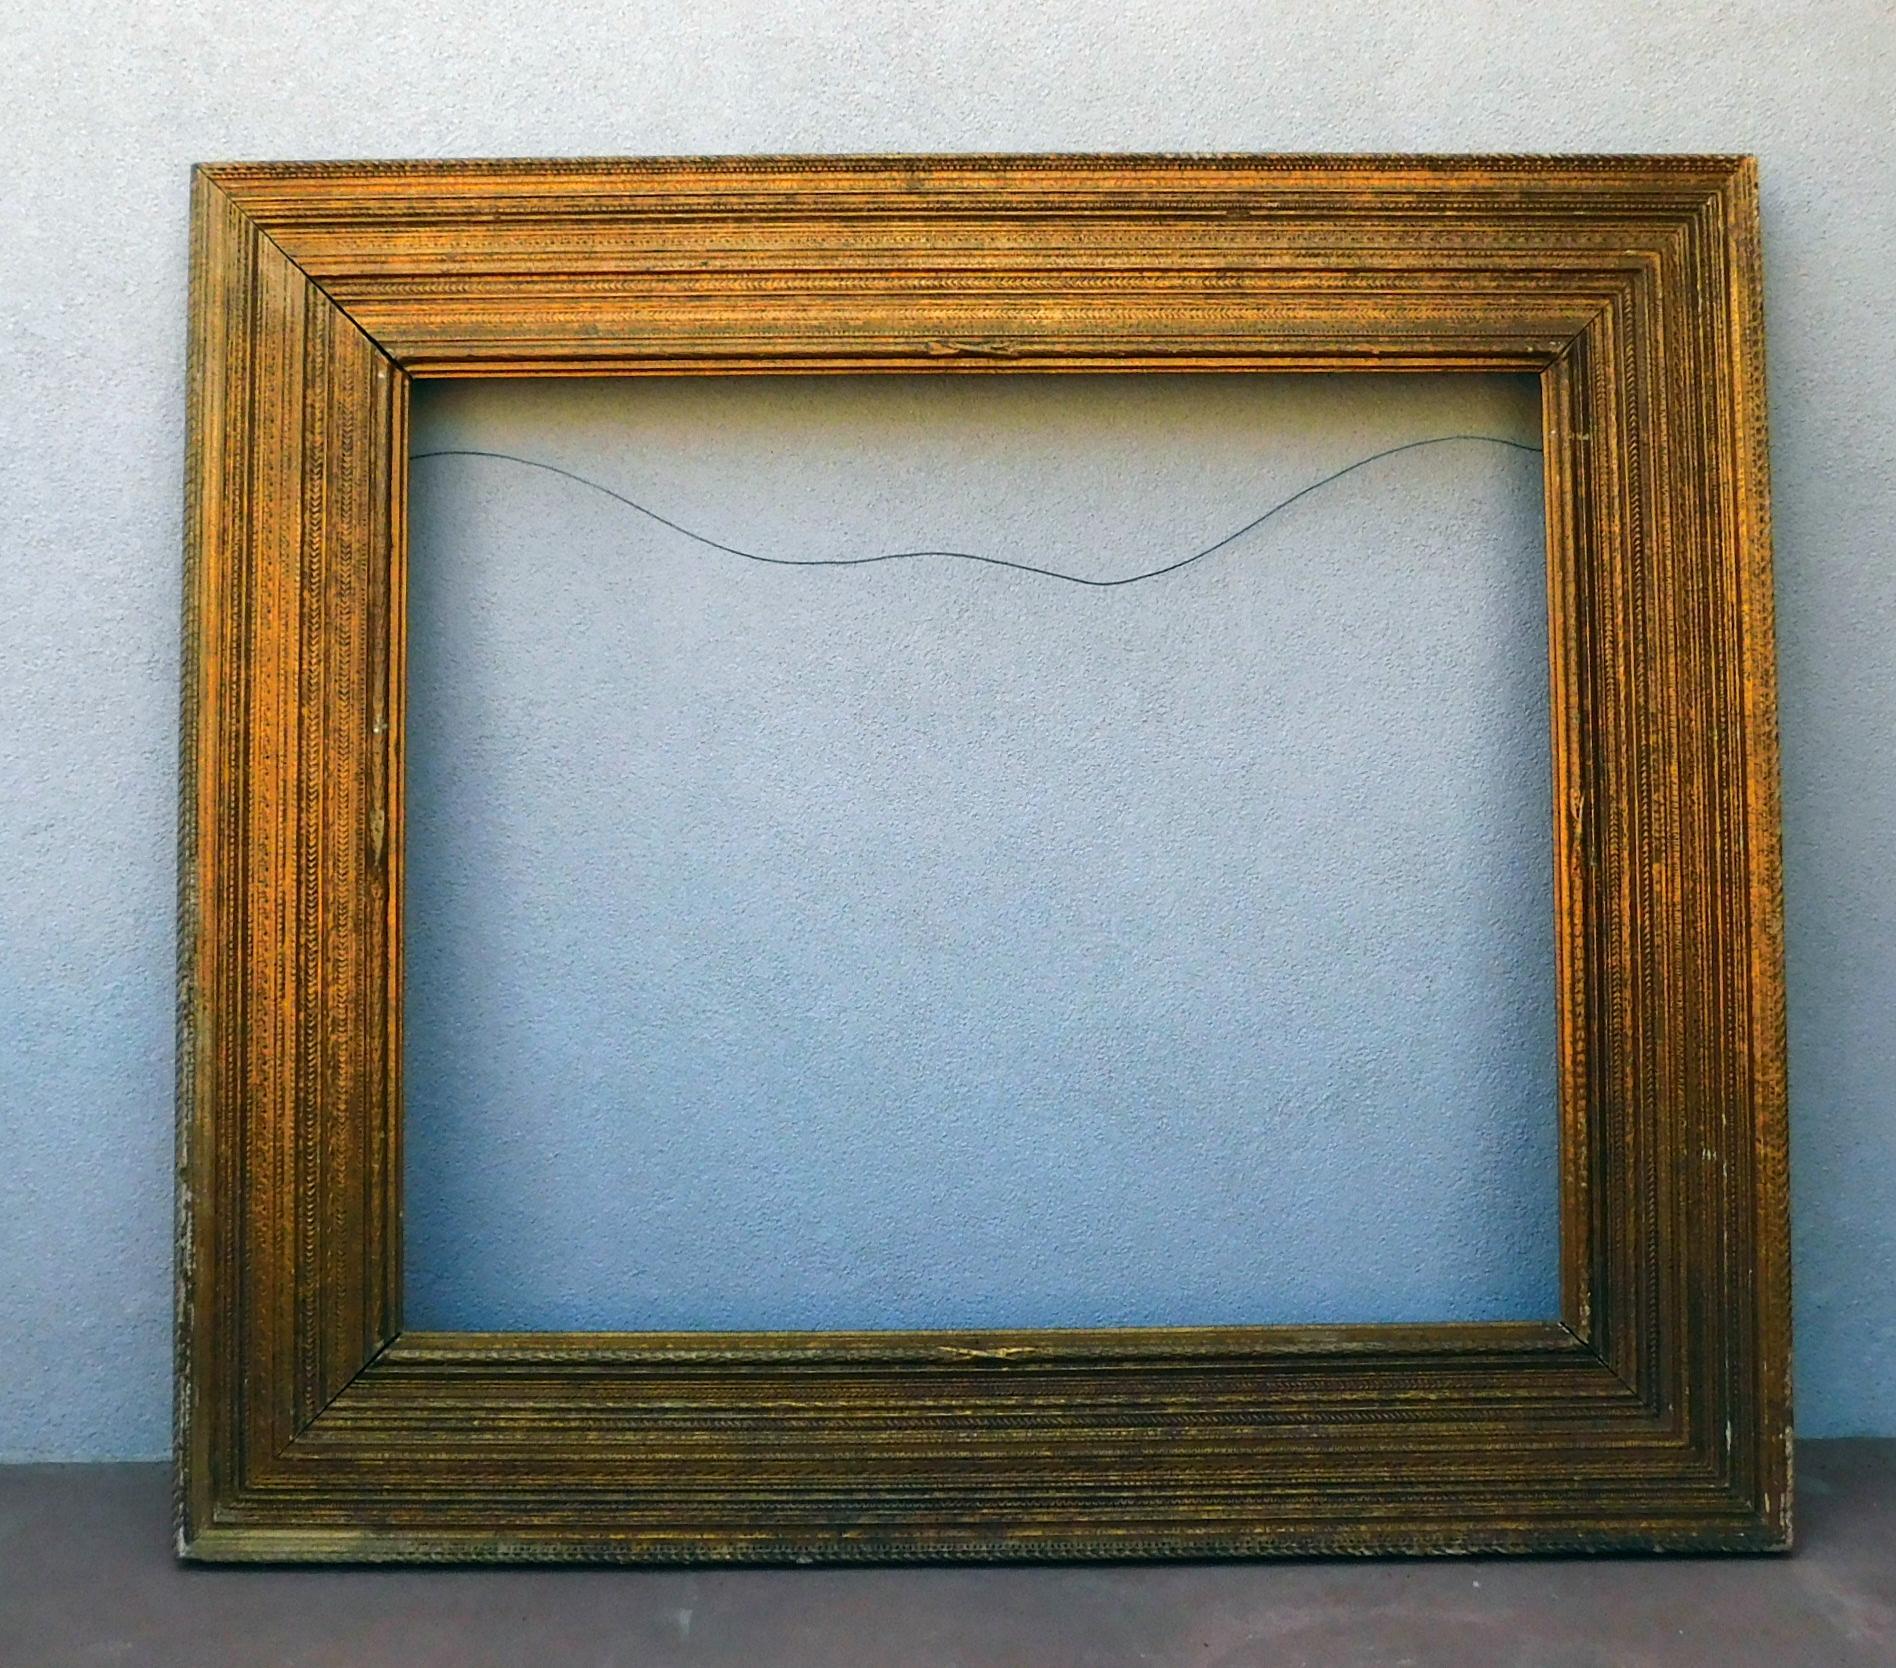 Large Newcomb Macklin American Painting Frame Stanford White Design, 1915 - 1920 For Sale 1